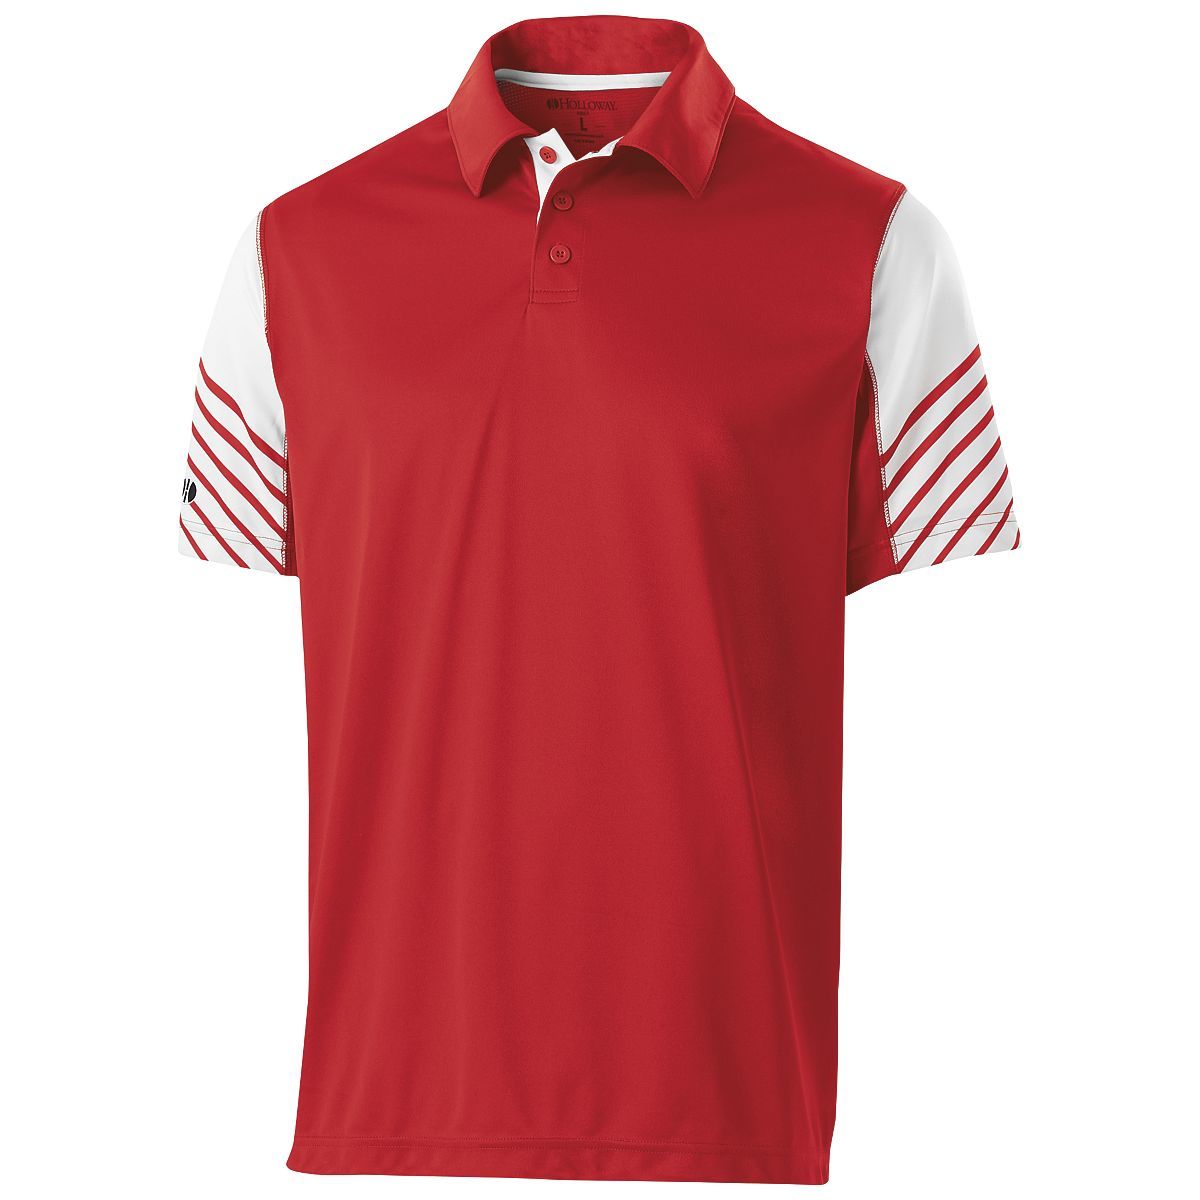 Holloway Arc Polo in Scarlet/White  -Part of the Adult, Adult-Polos, Polos, Holloway, Shirts product lines at KanaleyCreations.com